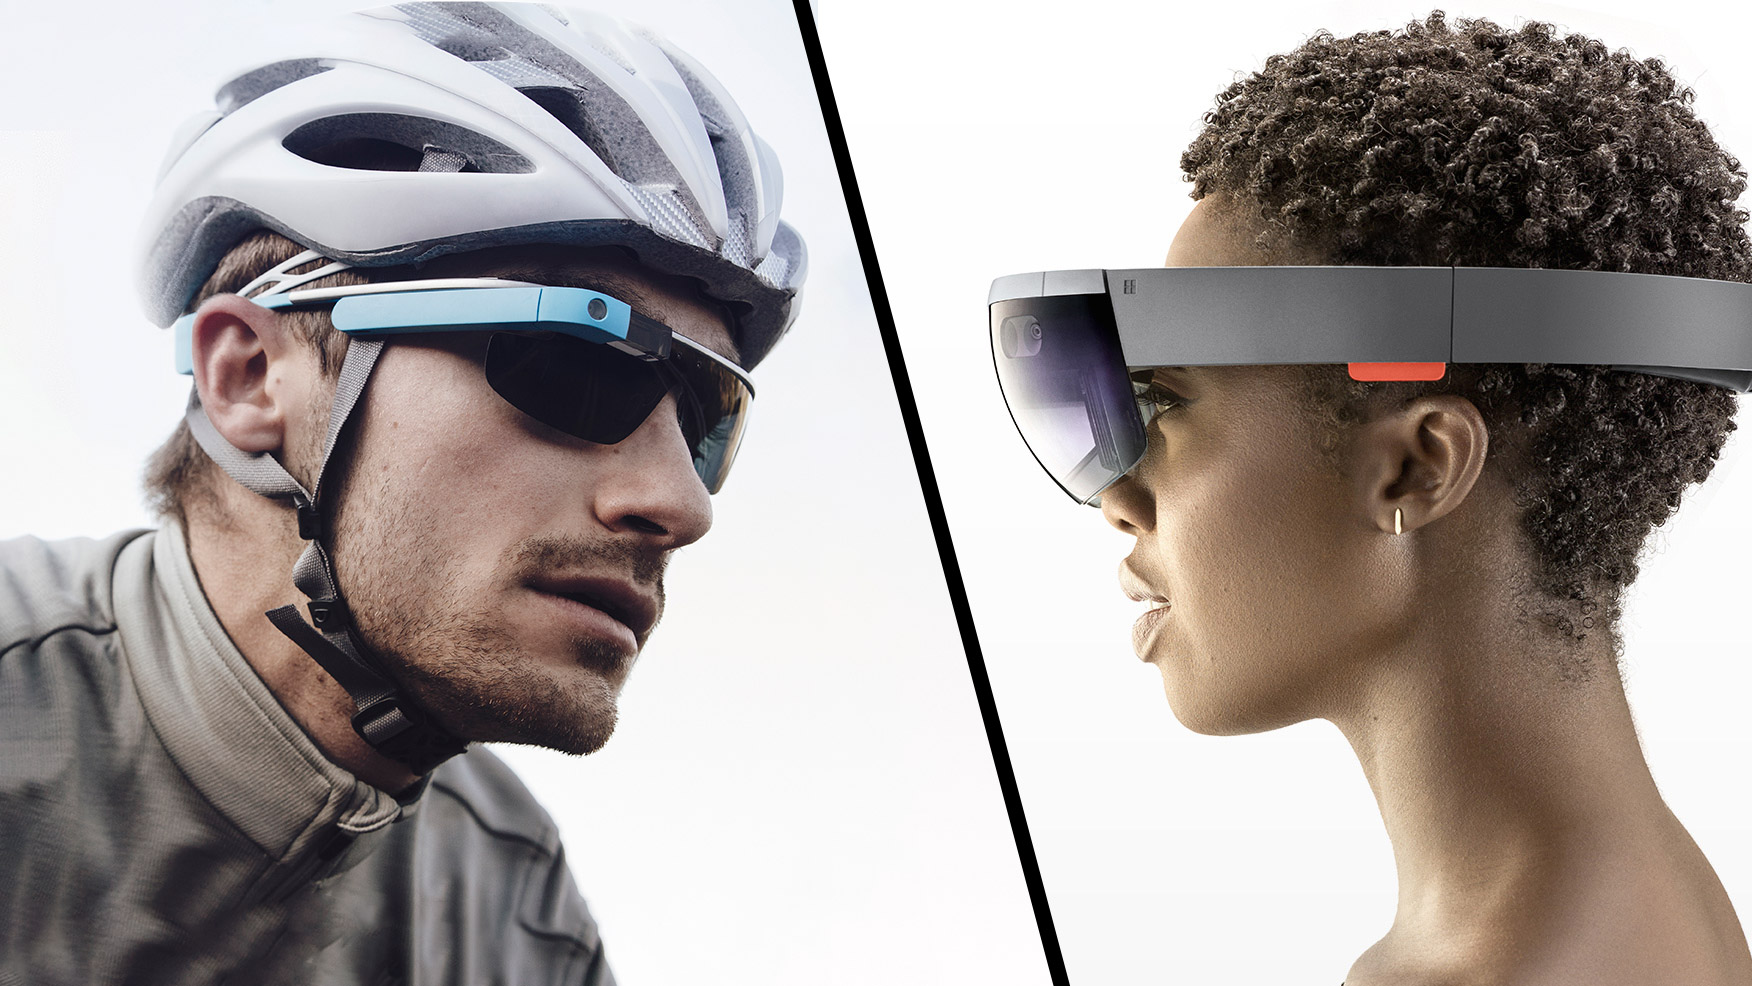 AR Eyeglasses – The Good, the Bad, and the Ugly